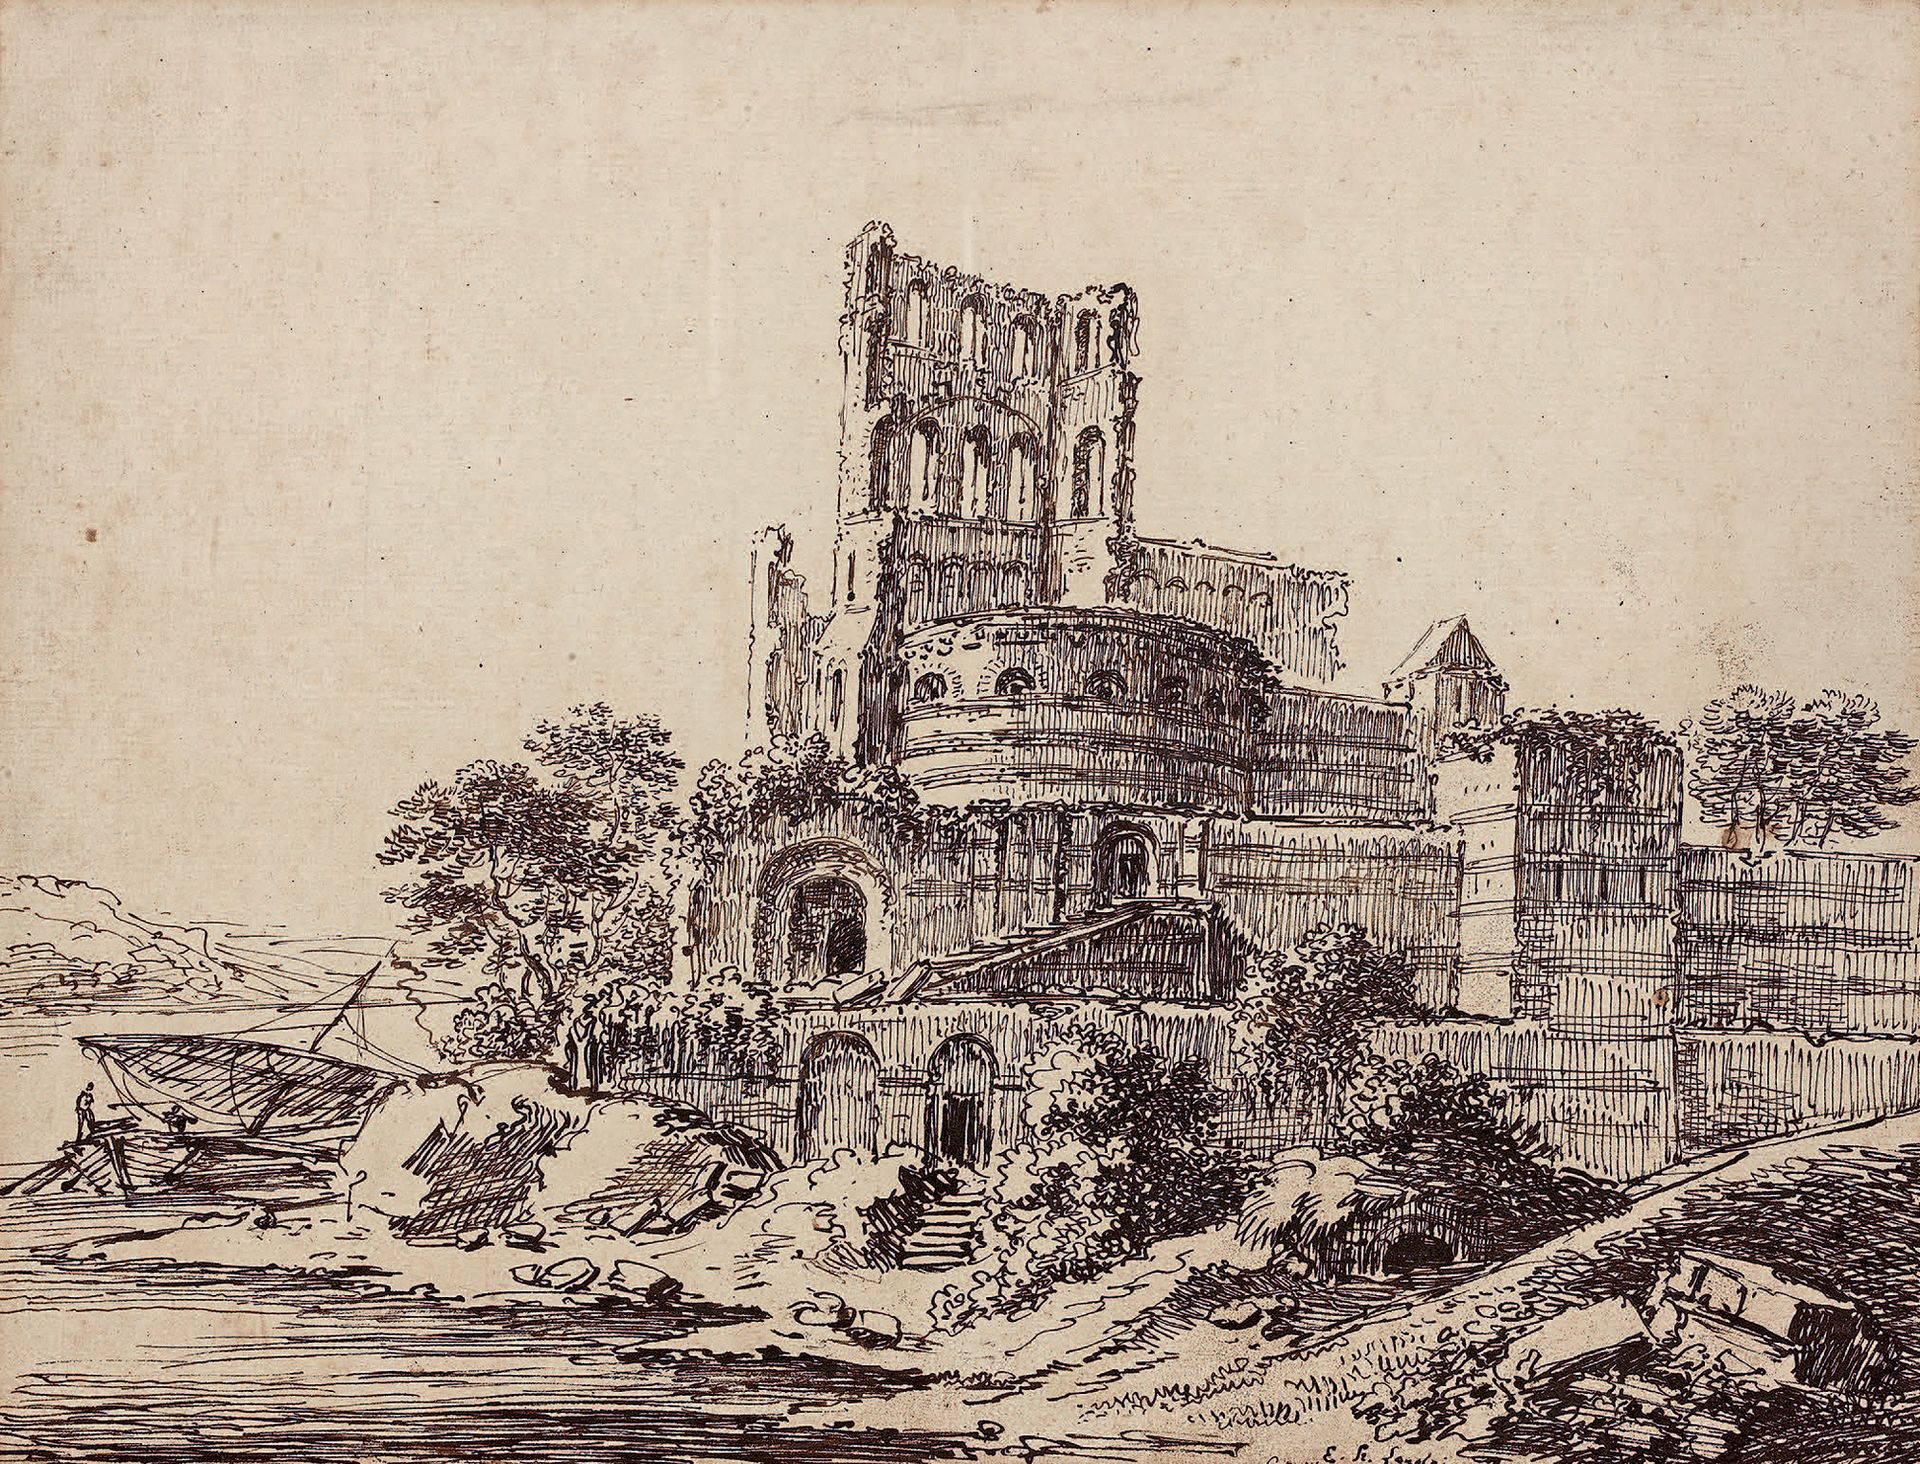 Eustache Hyacinthe LANGLOIS (1777-1837) Ruins of a Church in Front of a River
Pe&hellip;